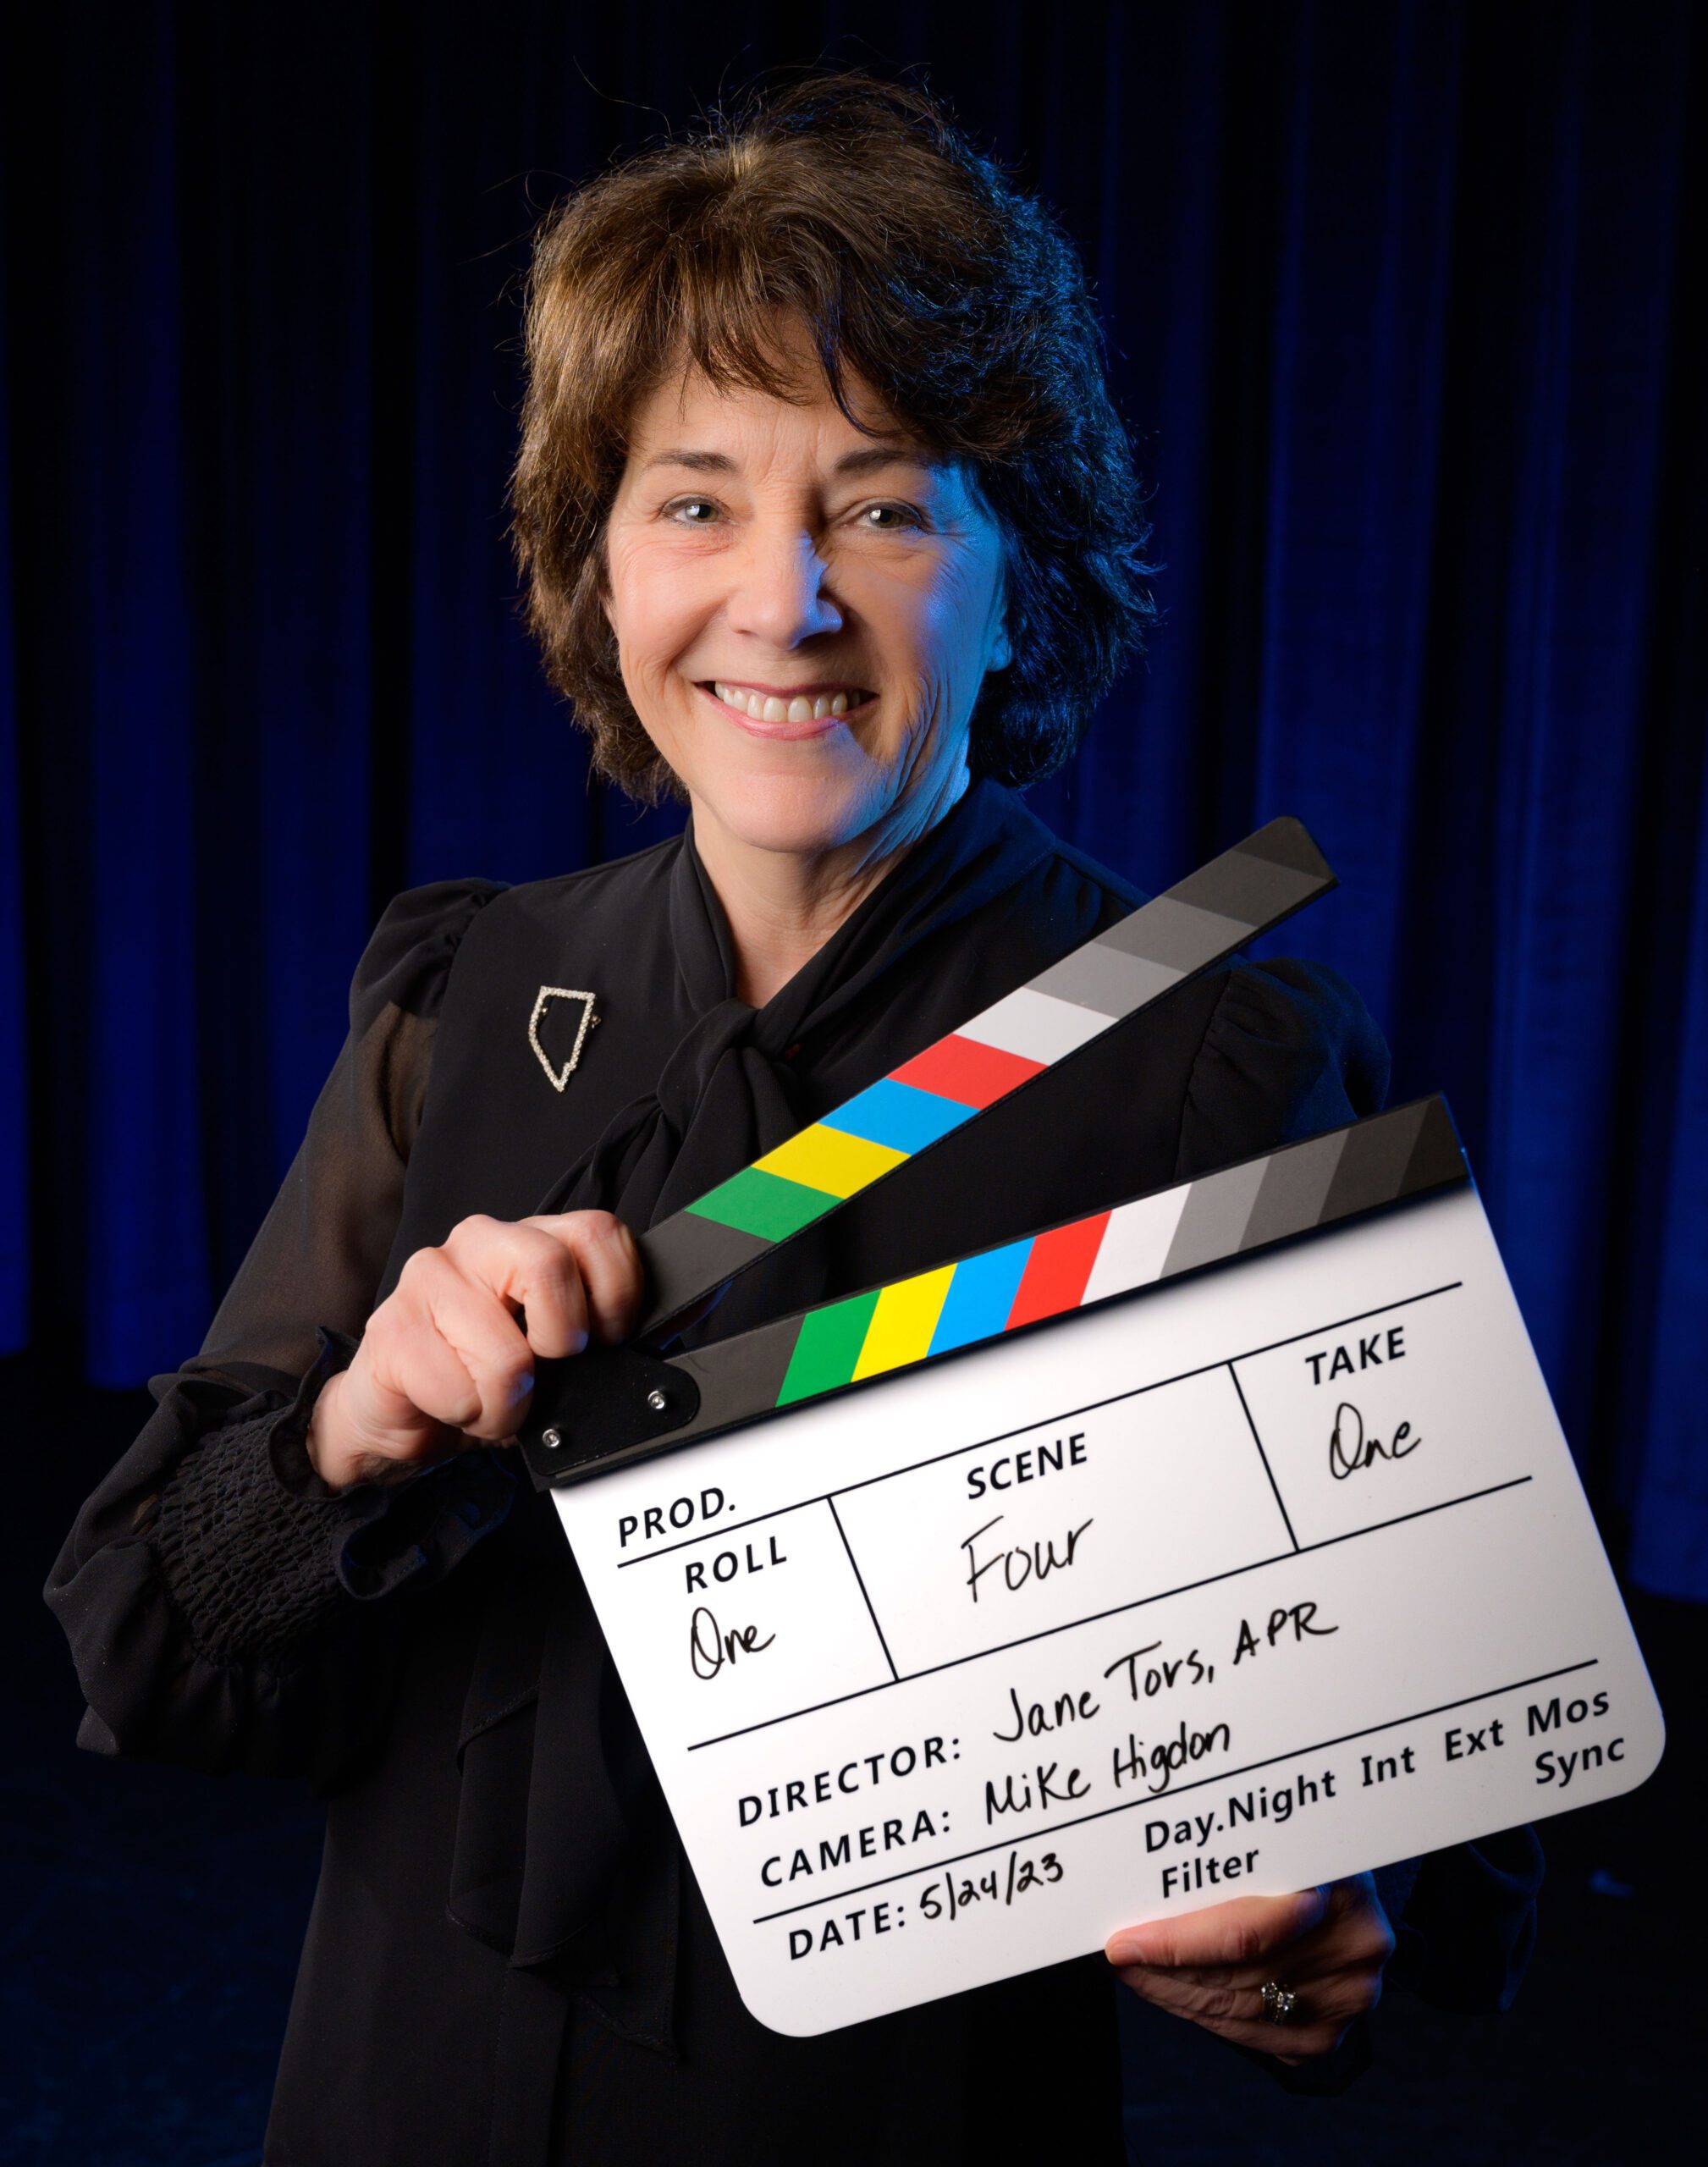 Woman holds movie clapper in front of blue curtains